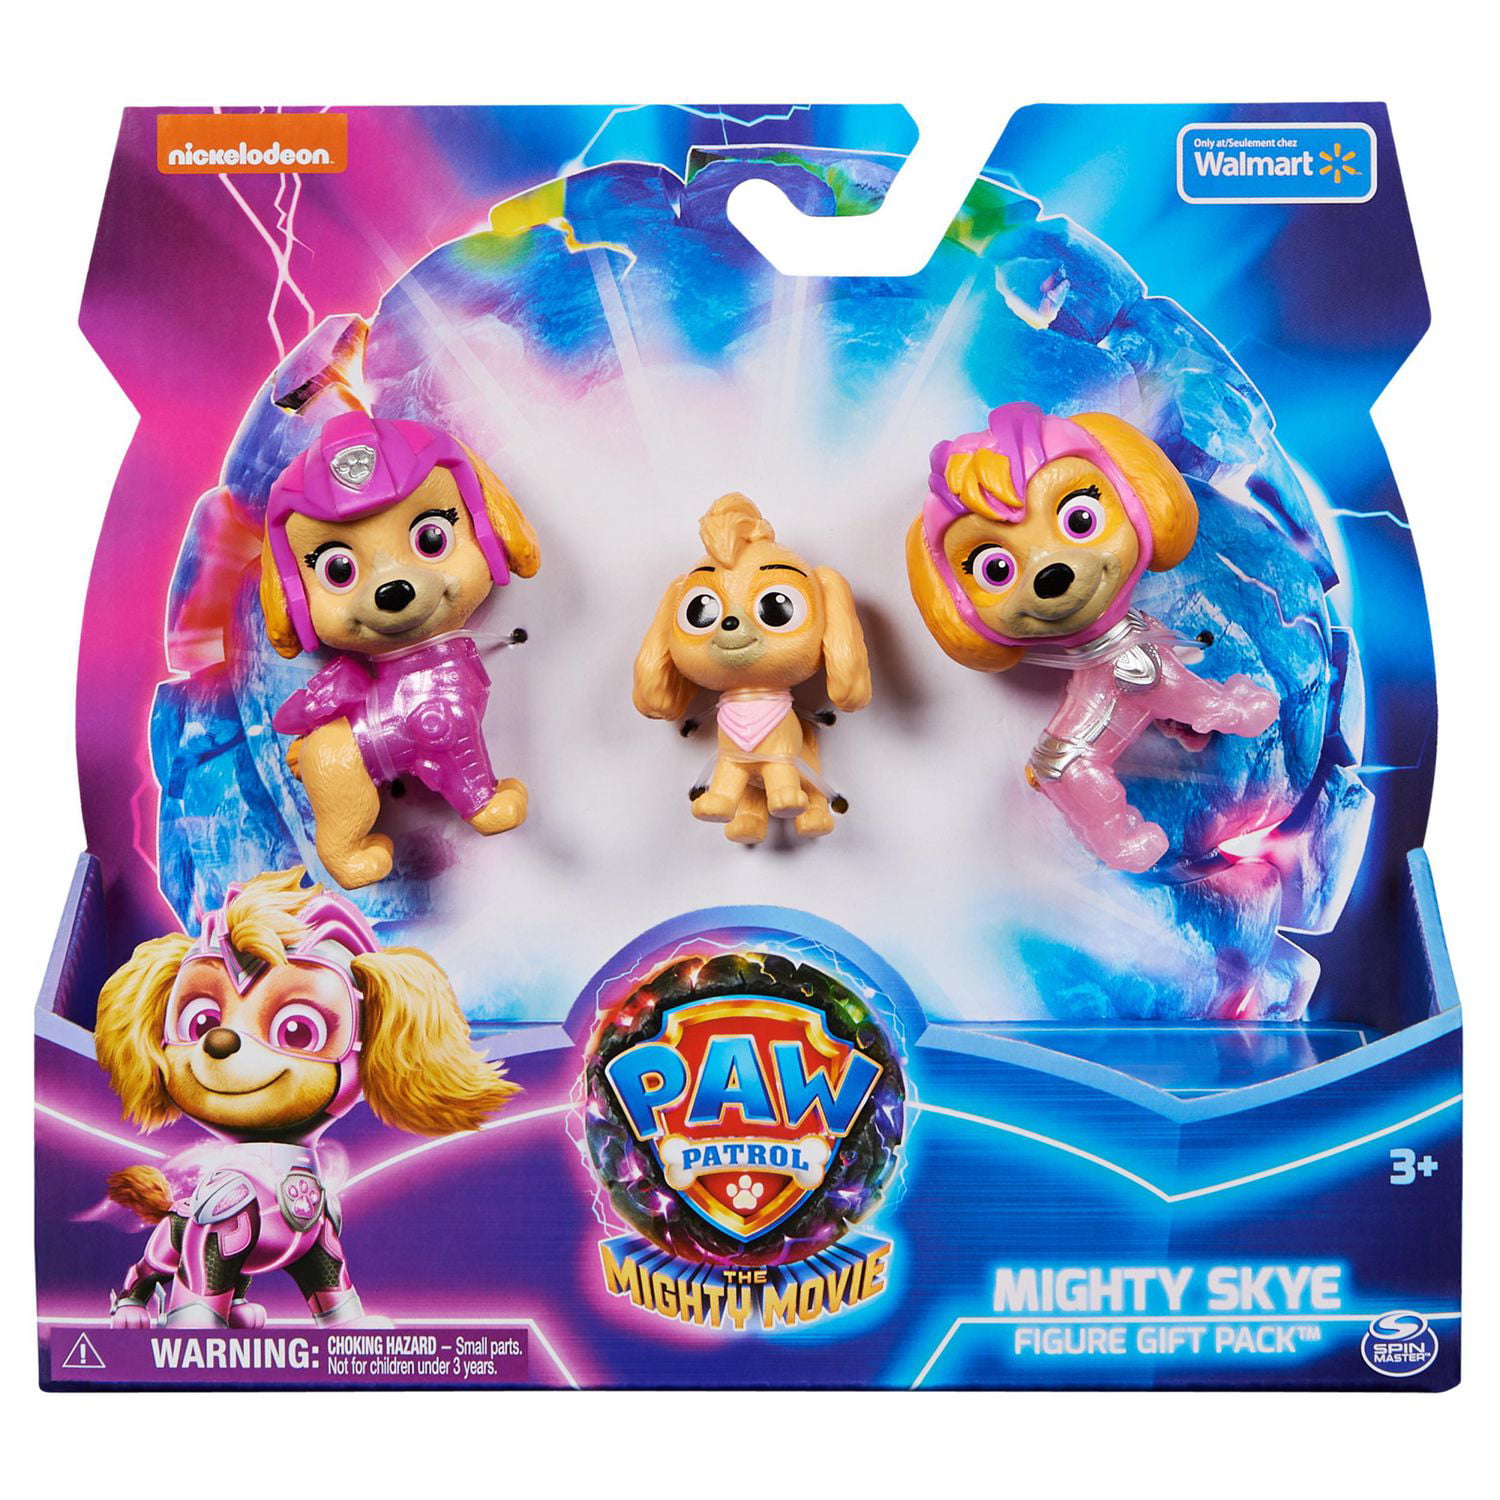 PAW Patrol: The Mighty Movie, Mighty Pups Skye, Exclusive 3-Piece